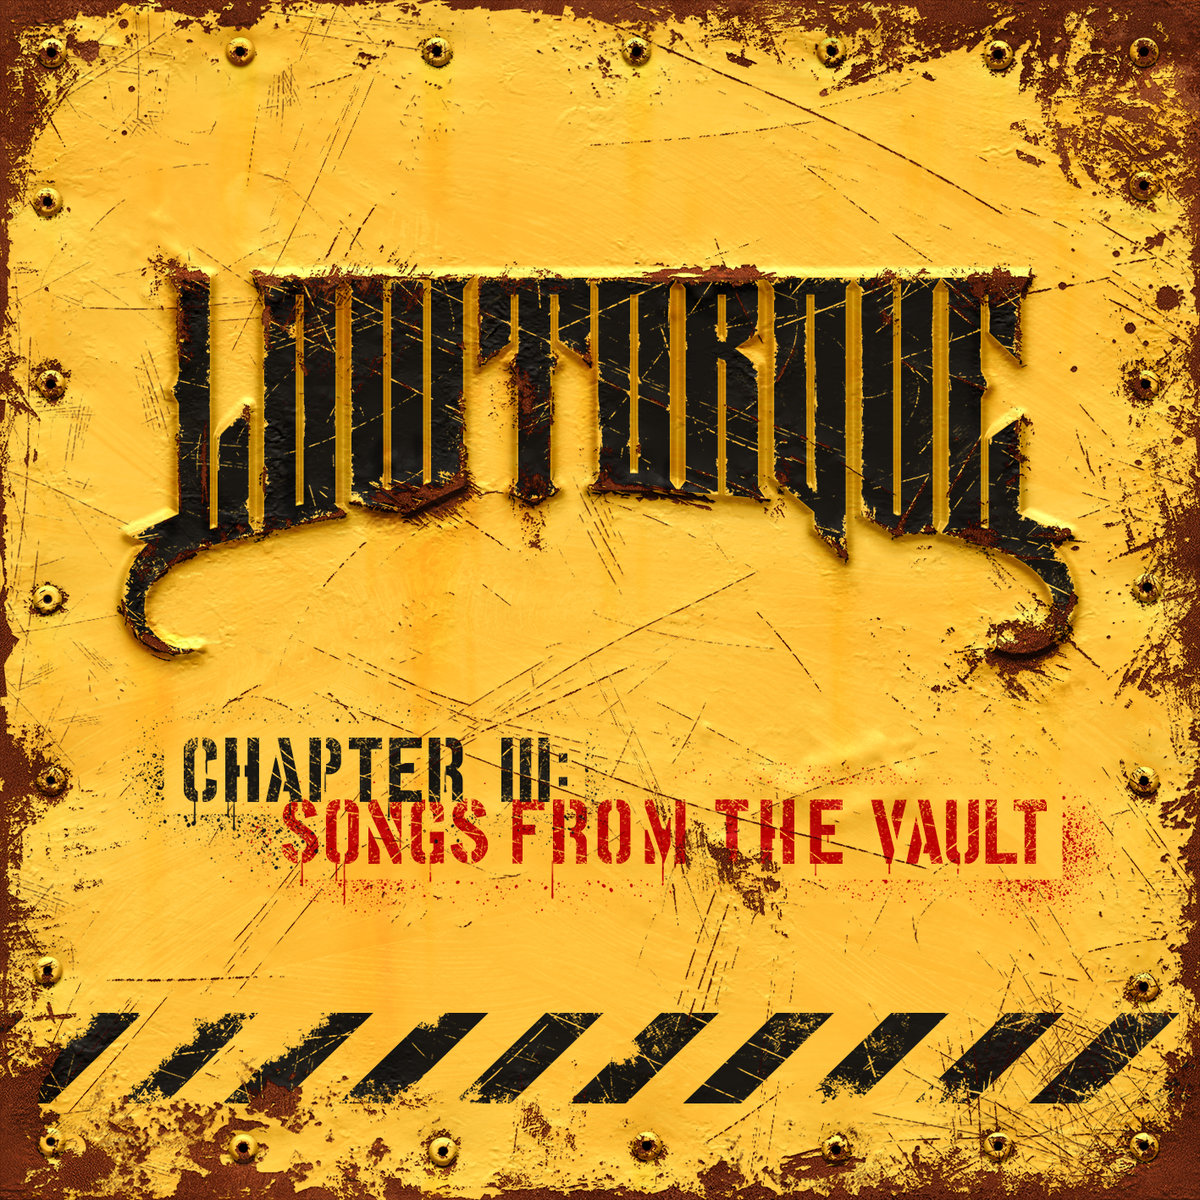 LOW TORQUE - Chapter III: Songs from the Vault cover 